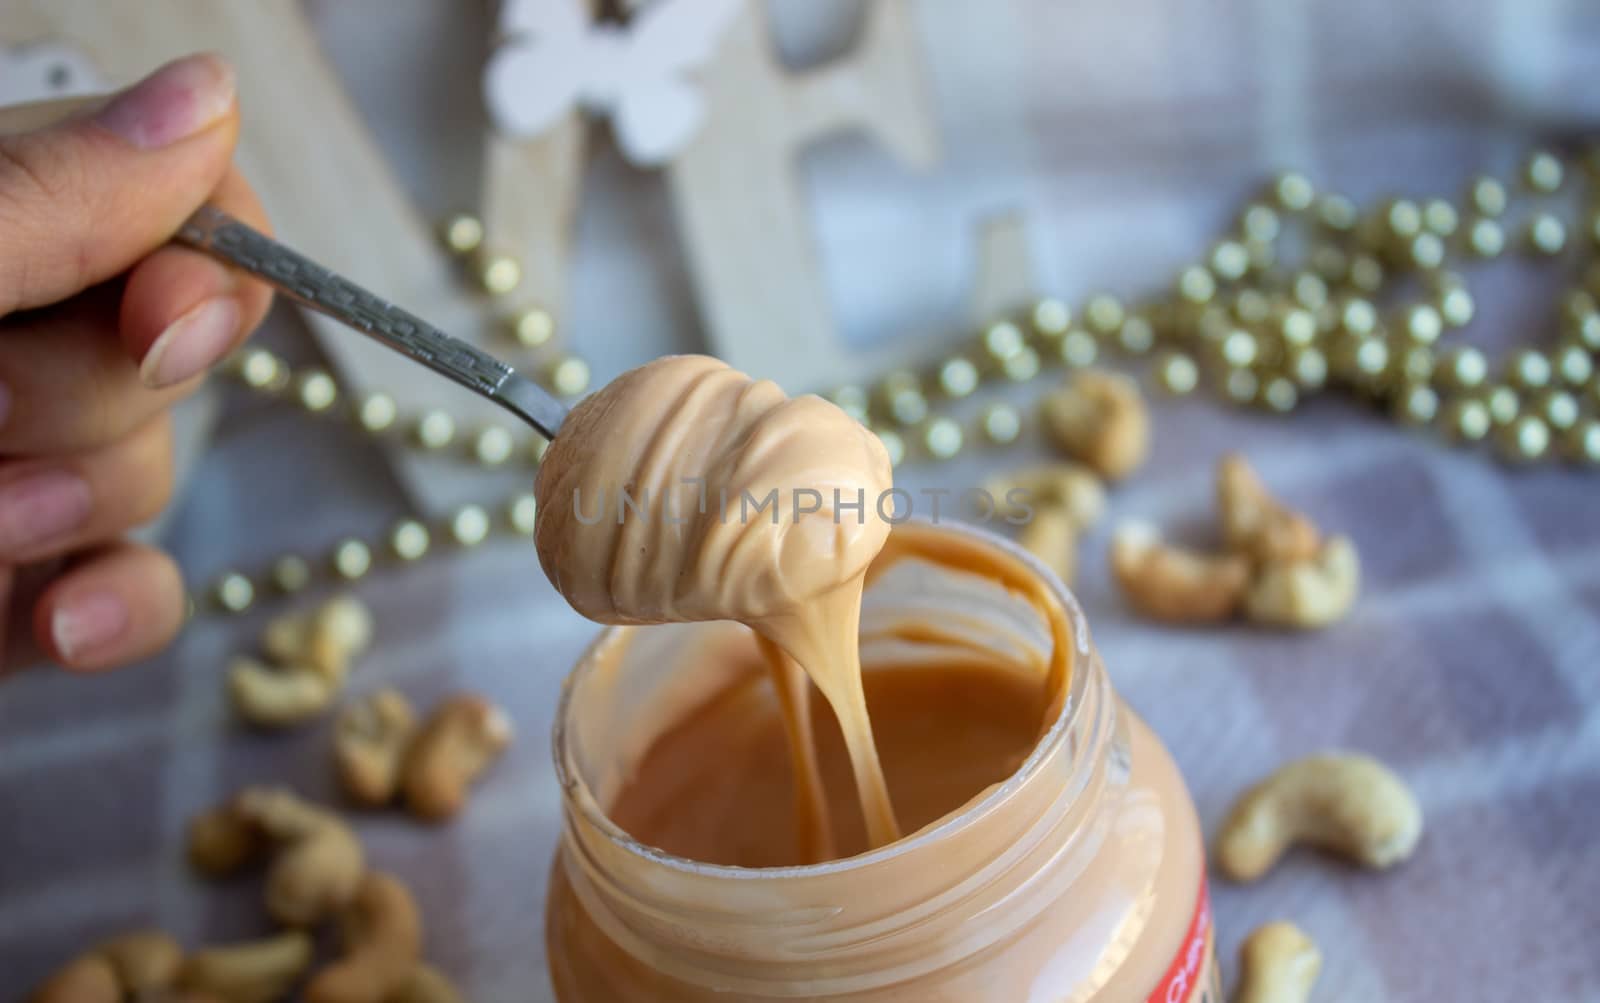 Creamy peanut butter and spoon on background.